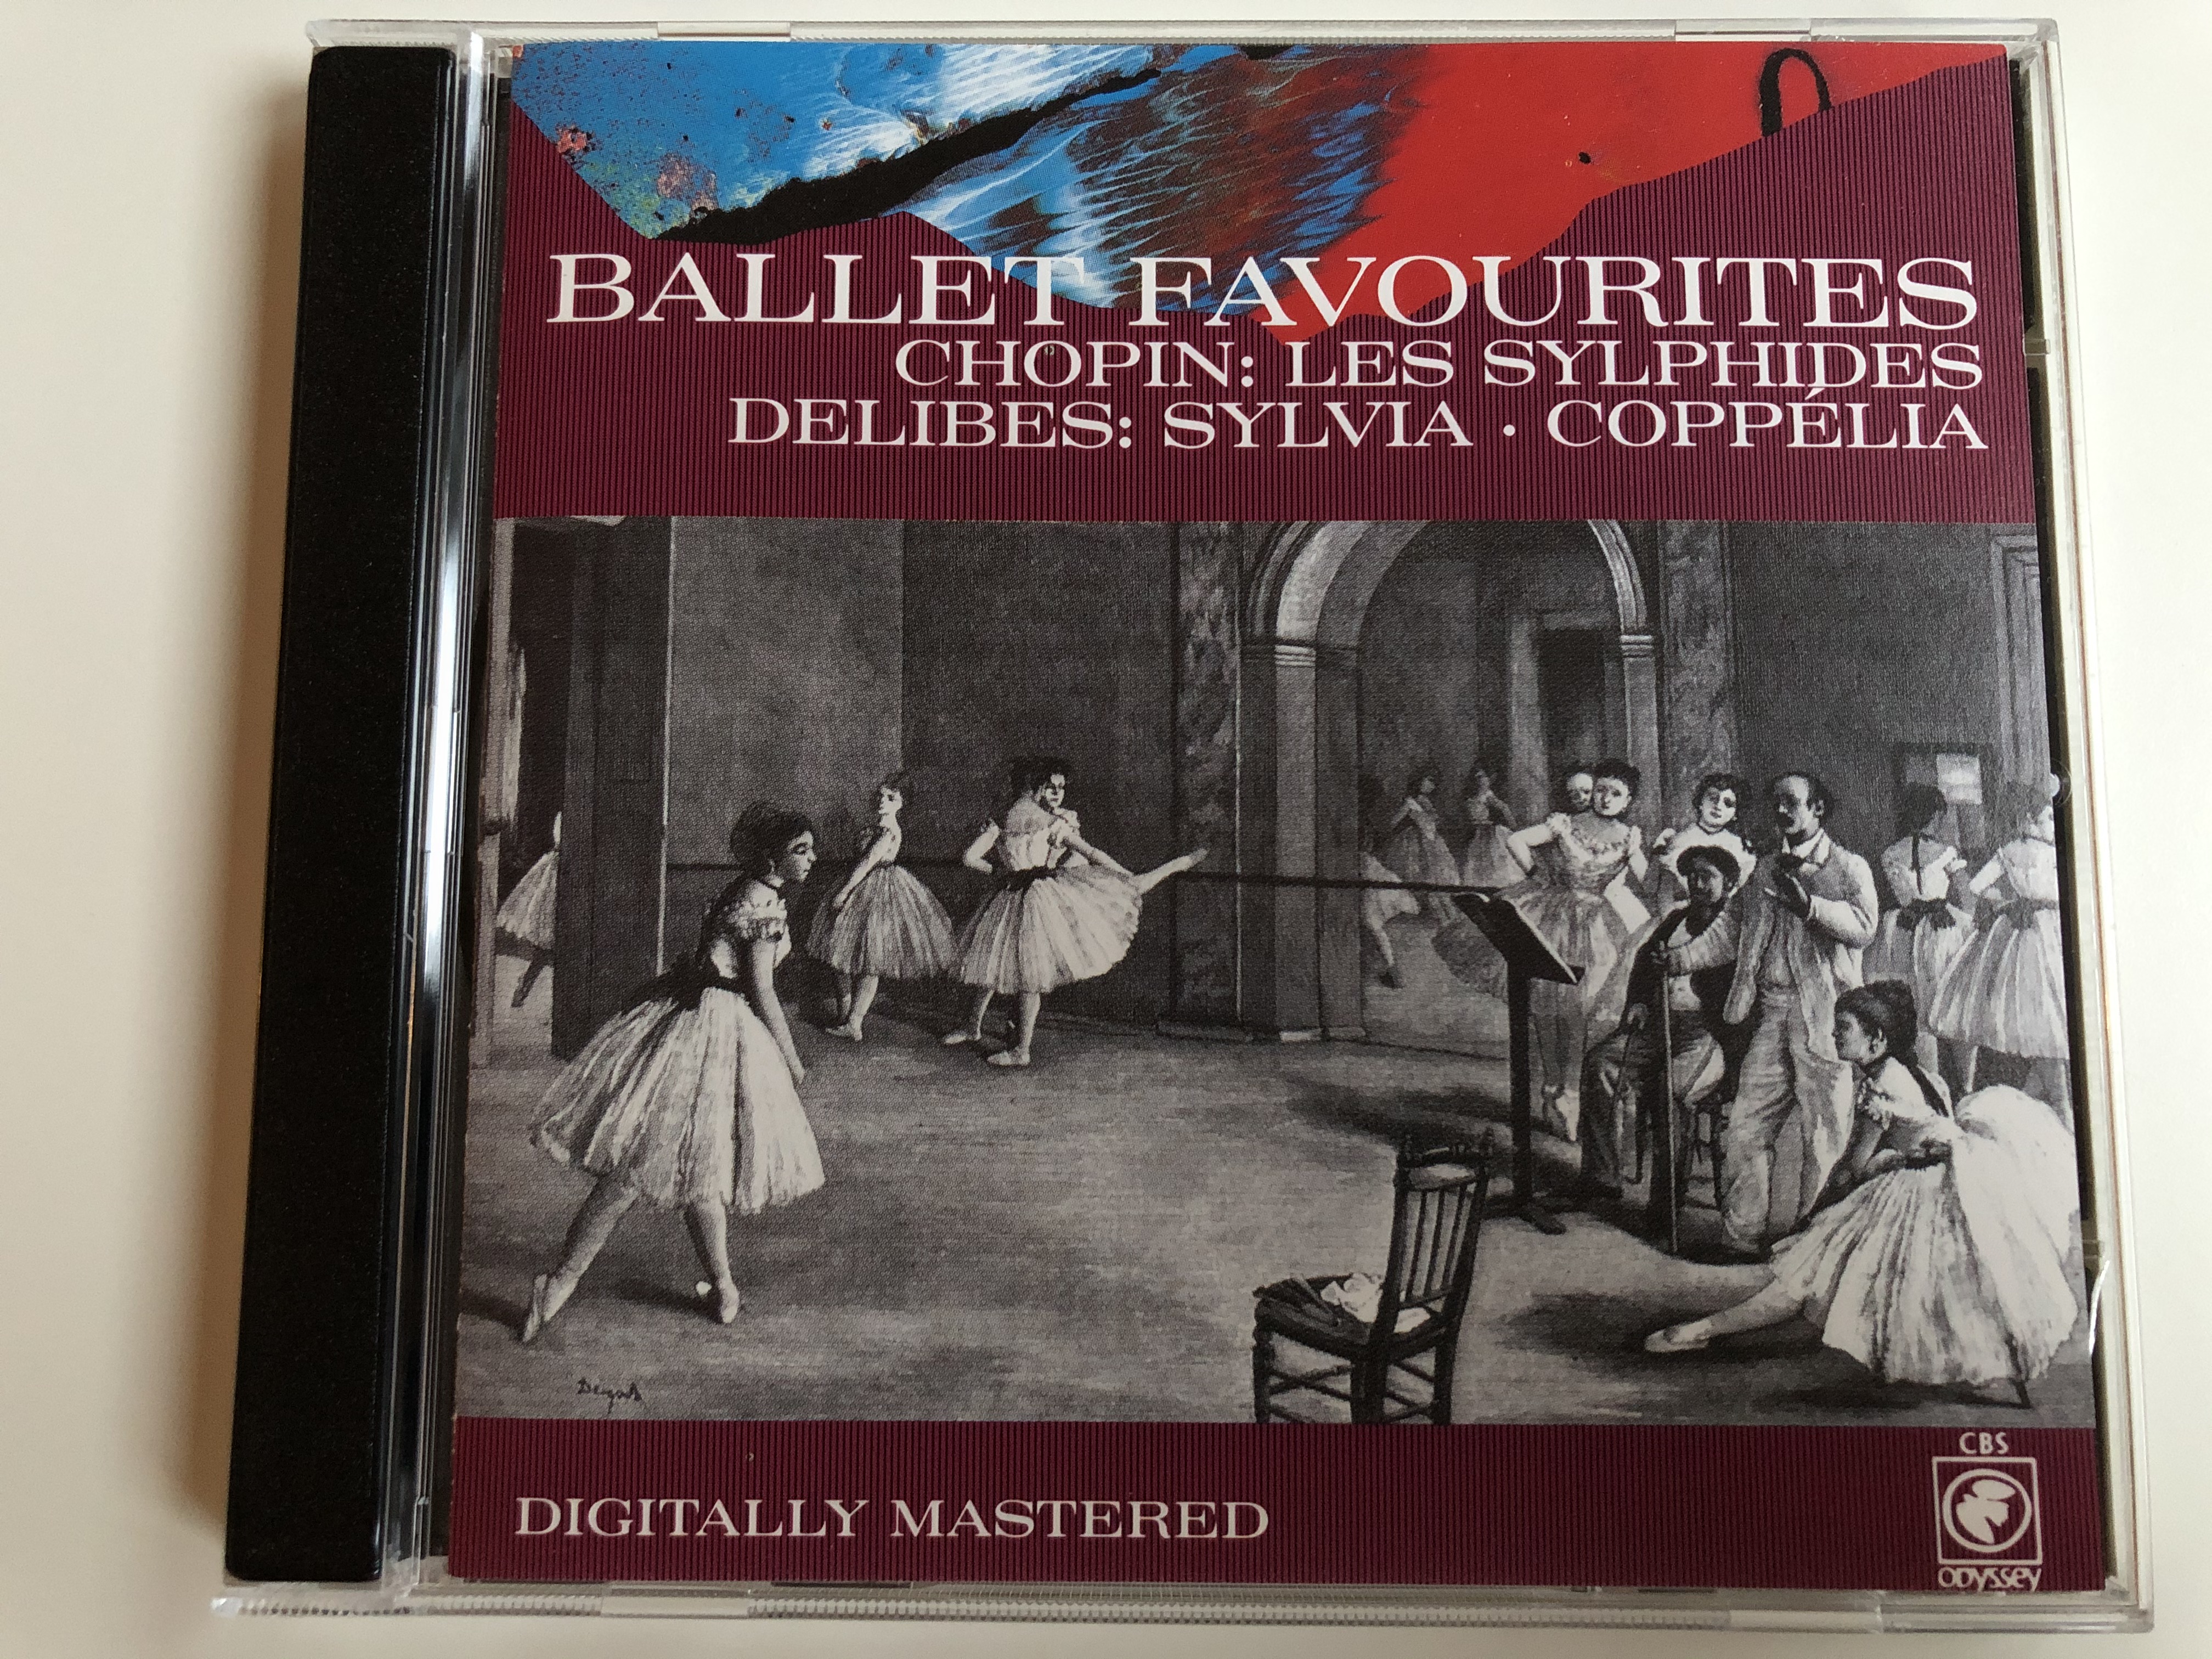 ballet-favourites-chopin-les-sylphides-delibes-sylvia-coppelia-digitally-mastered-cbs-odyssey-audio-cd-1989-stereo-mbk-44815-1-.jpg